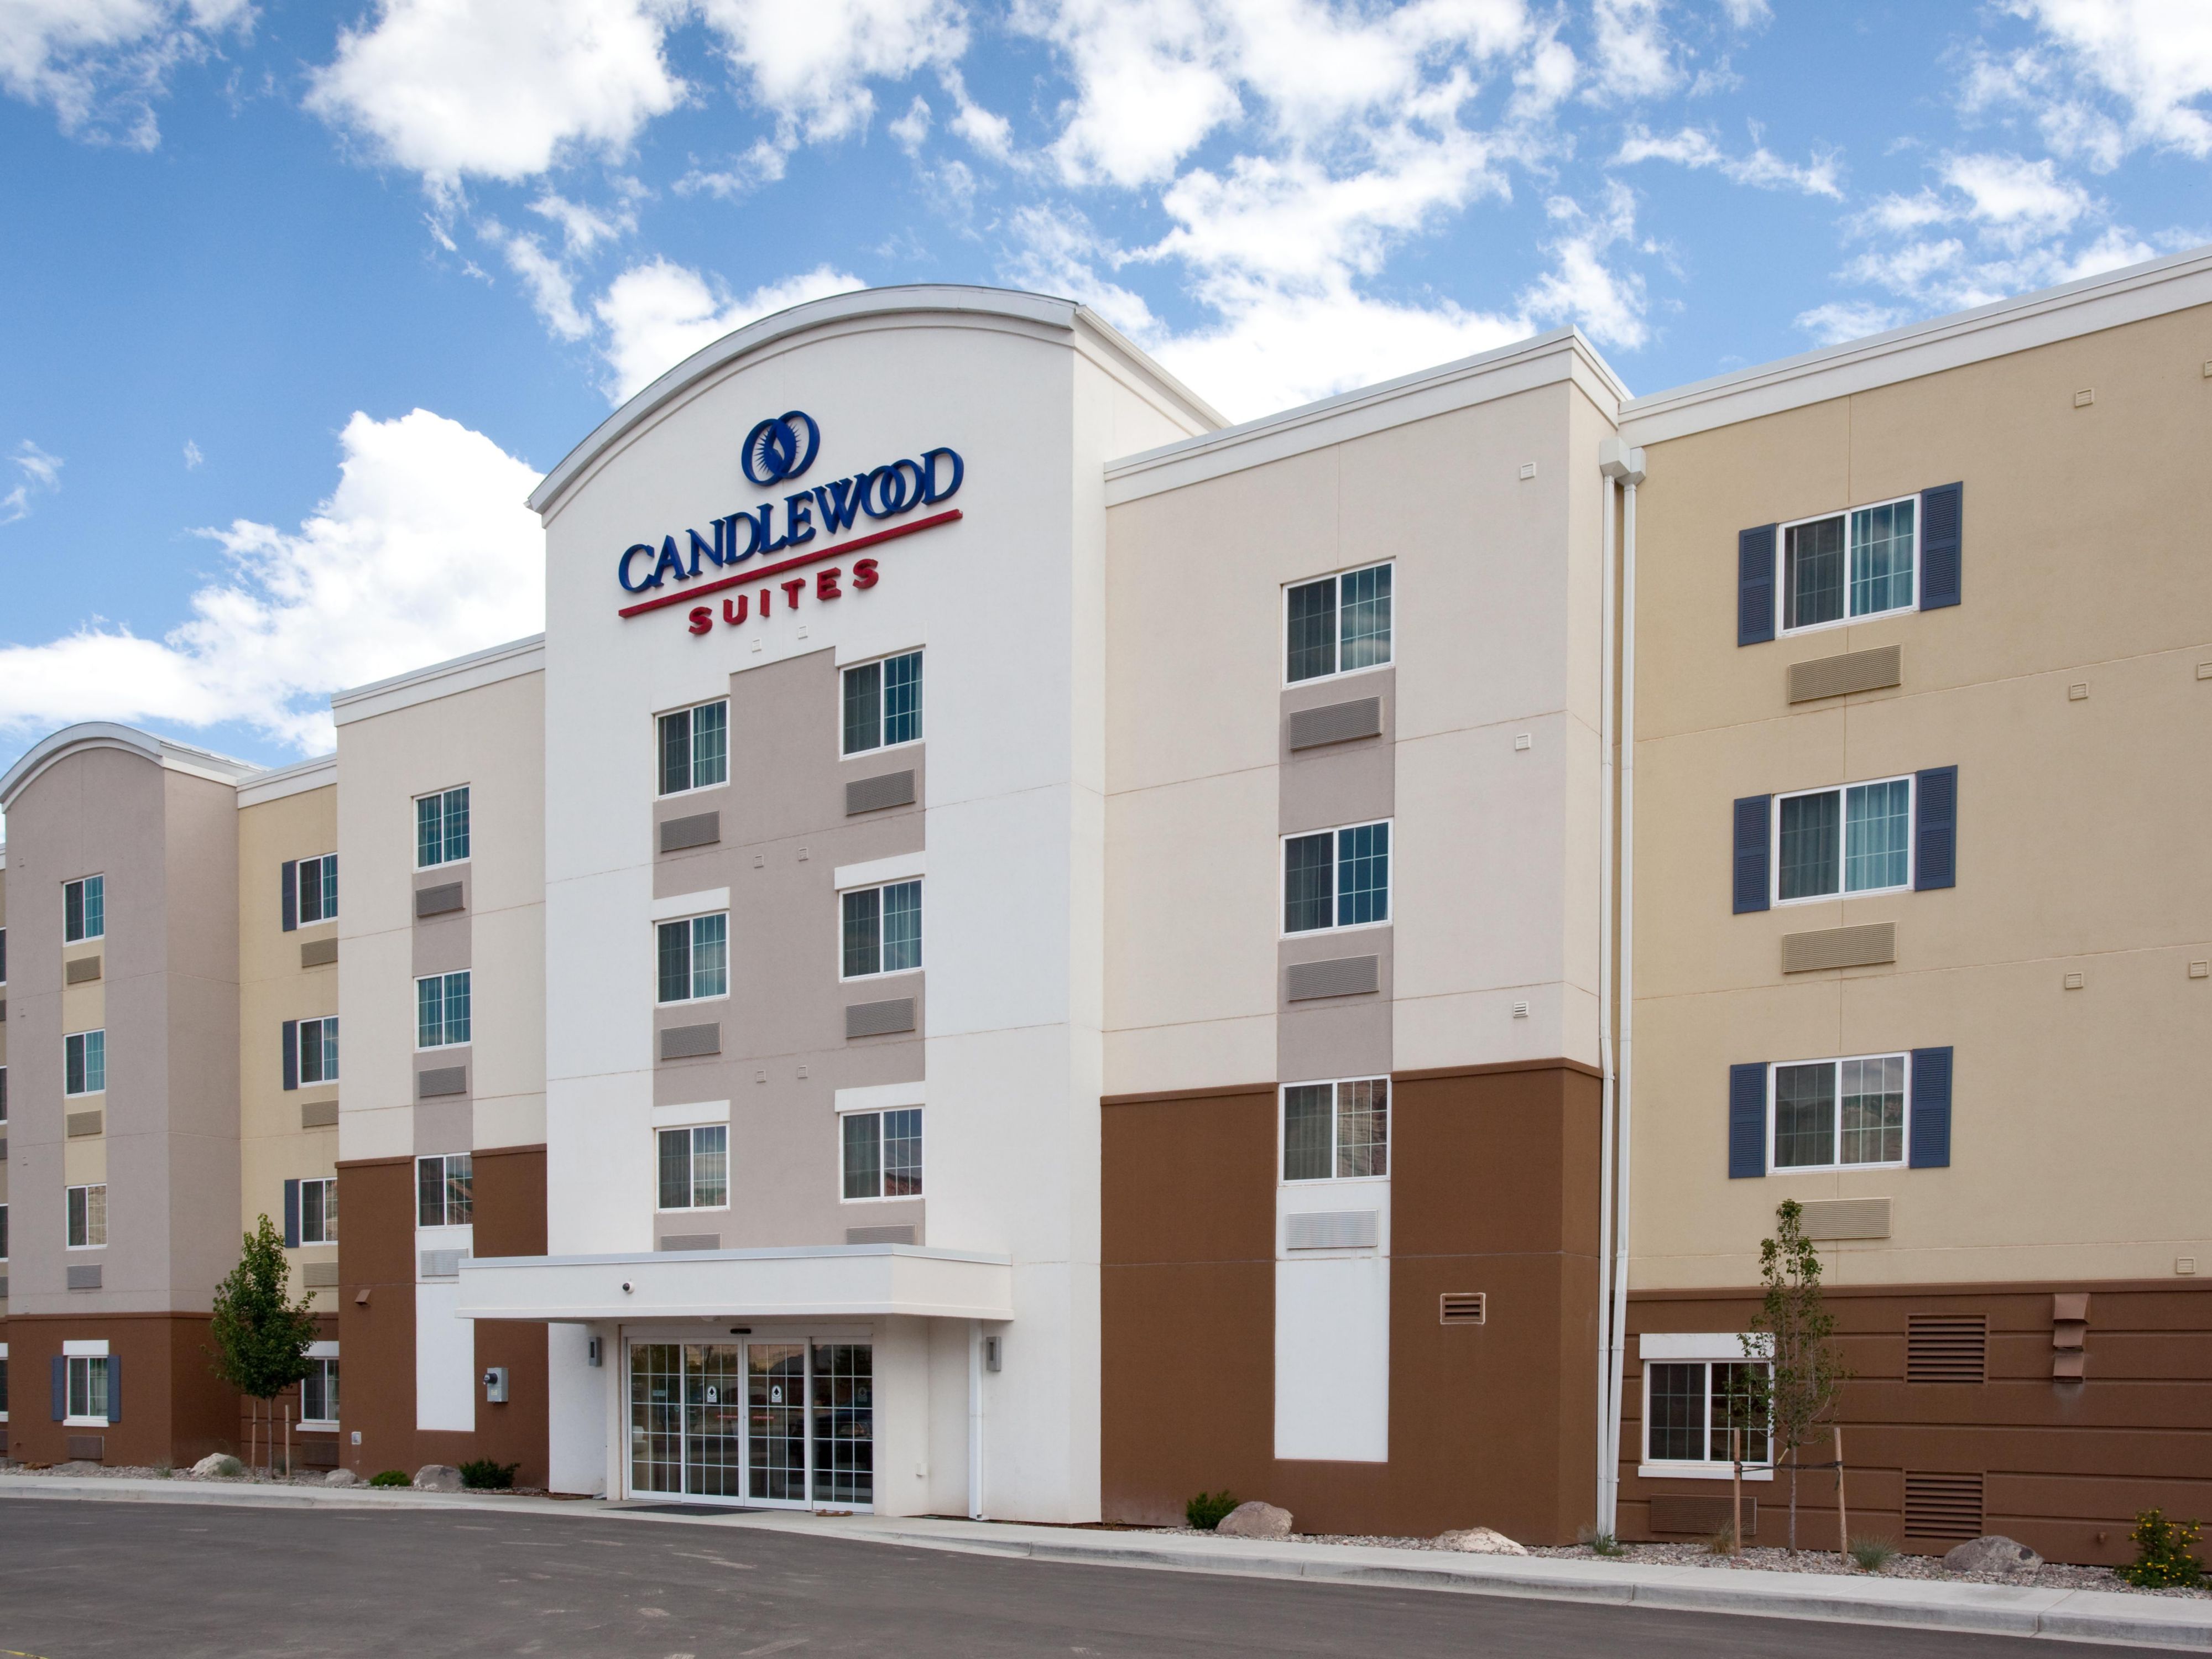 Parachute Hotels: Candlewood Suites Parachute - Extended Stay Hotel in